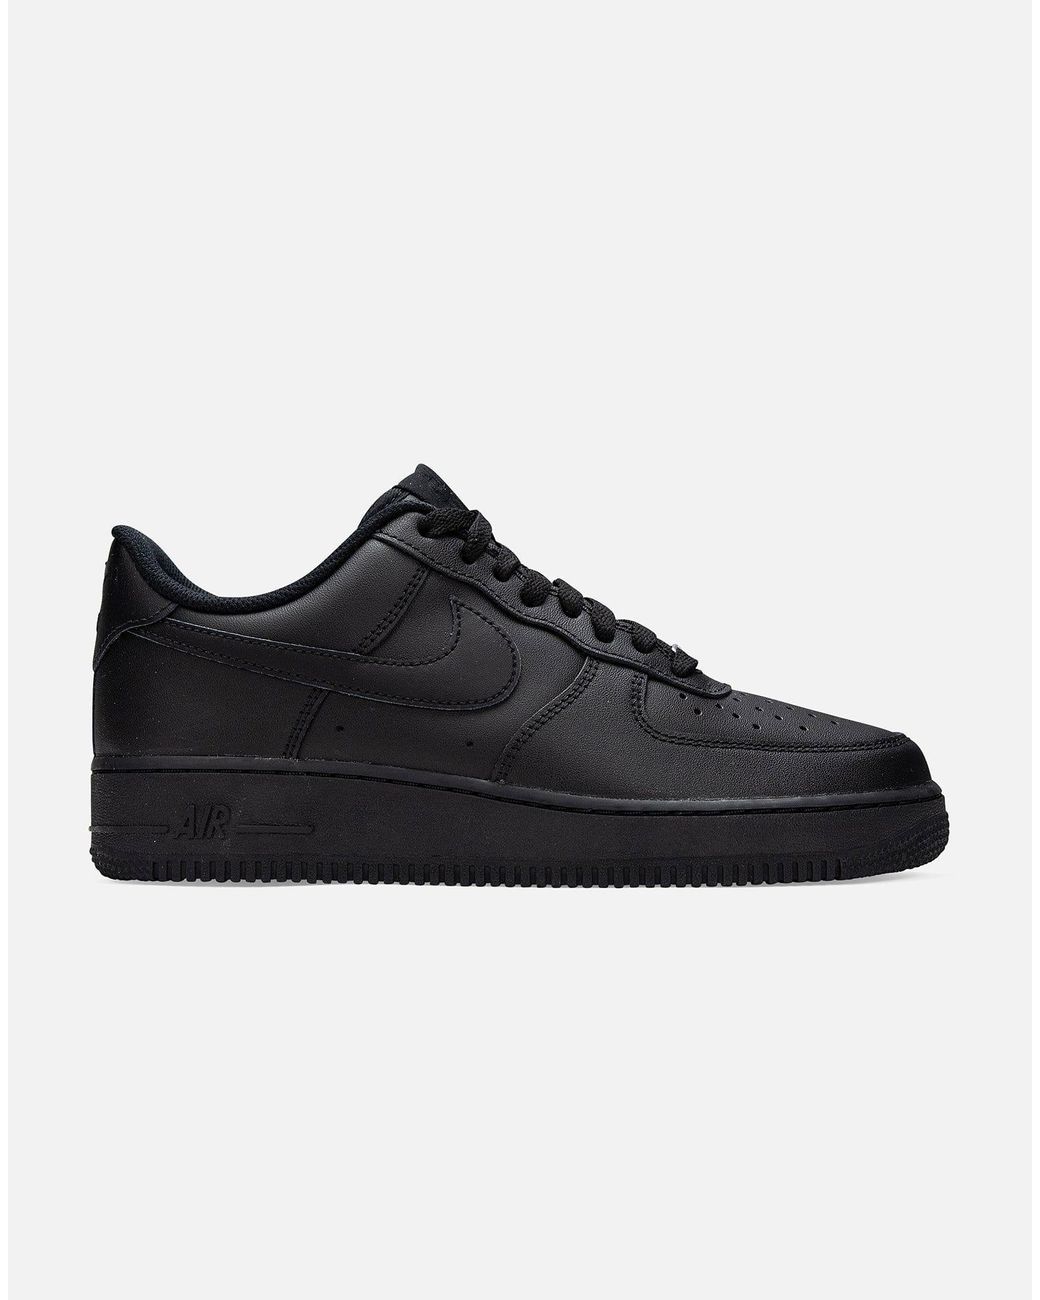 Nike Leather Air Force 1 '07 in Black for Men - Lyst